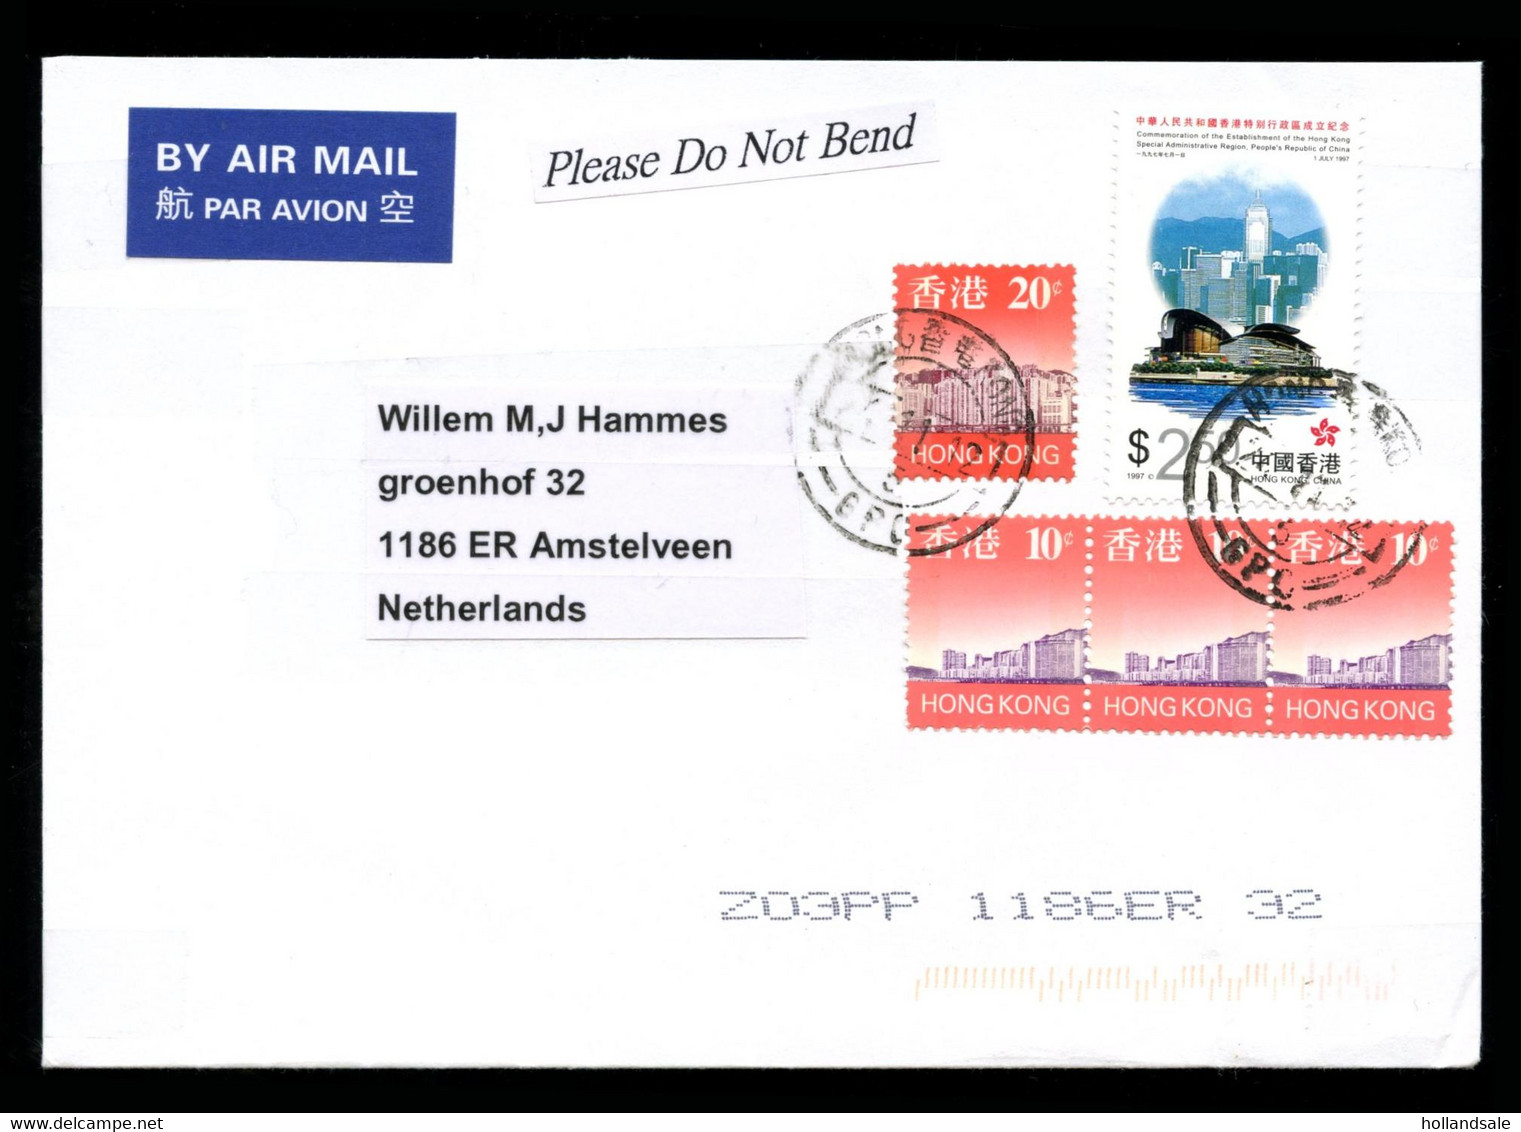 CHINA  HONG KONG - 2012 Cover Sent To The Netherlands. Franked With MICHEL # 789 3x, 790a, 823. - Covers & Documents